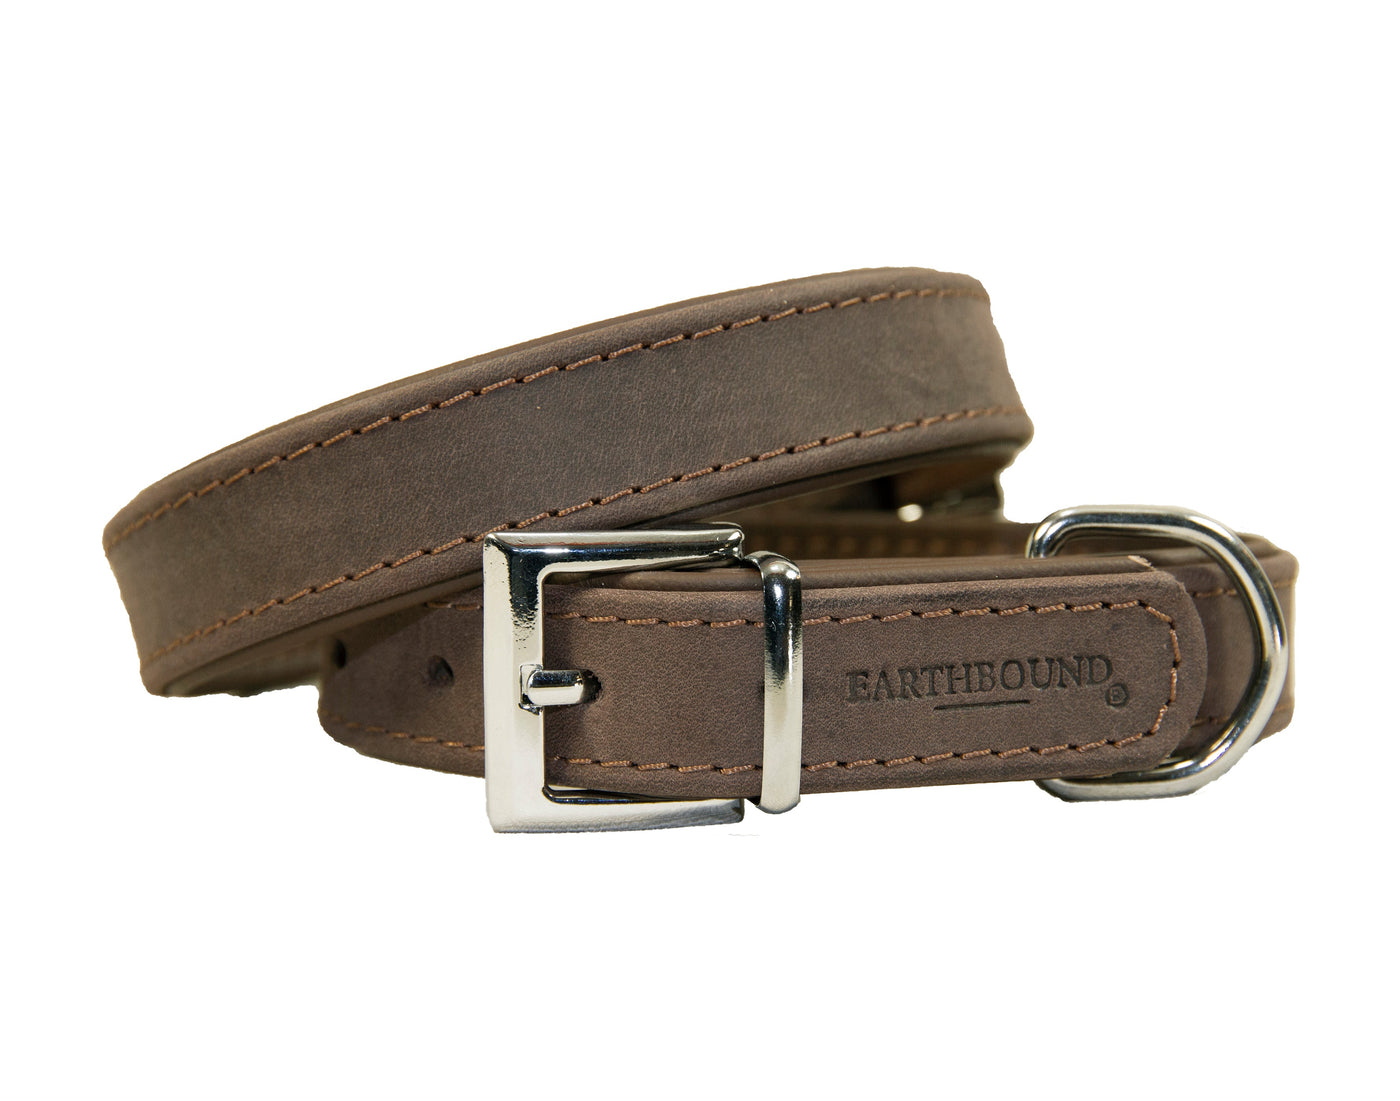 Oakland leather dog collar brown